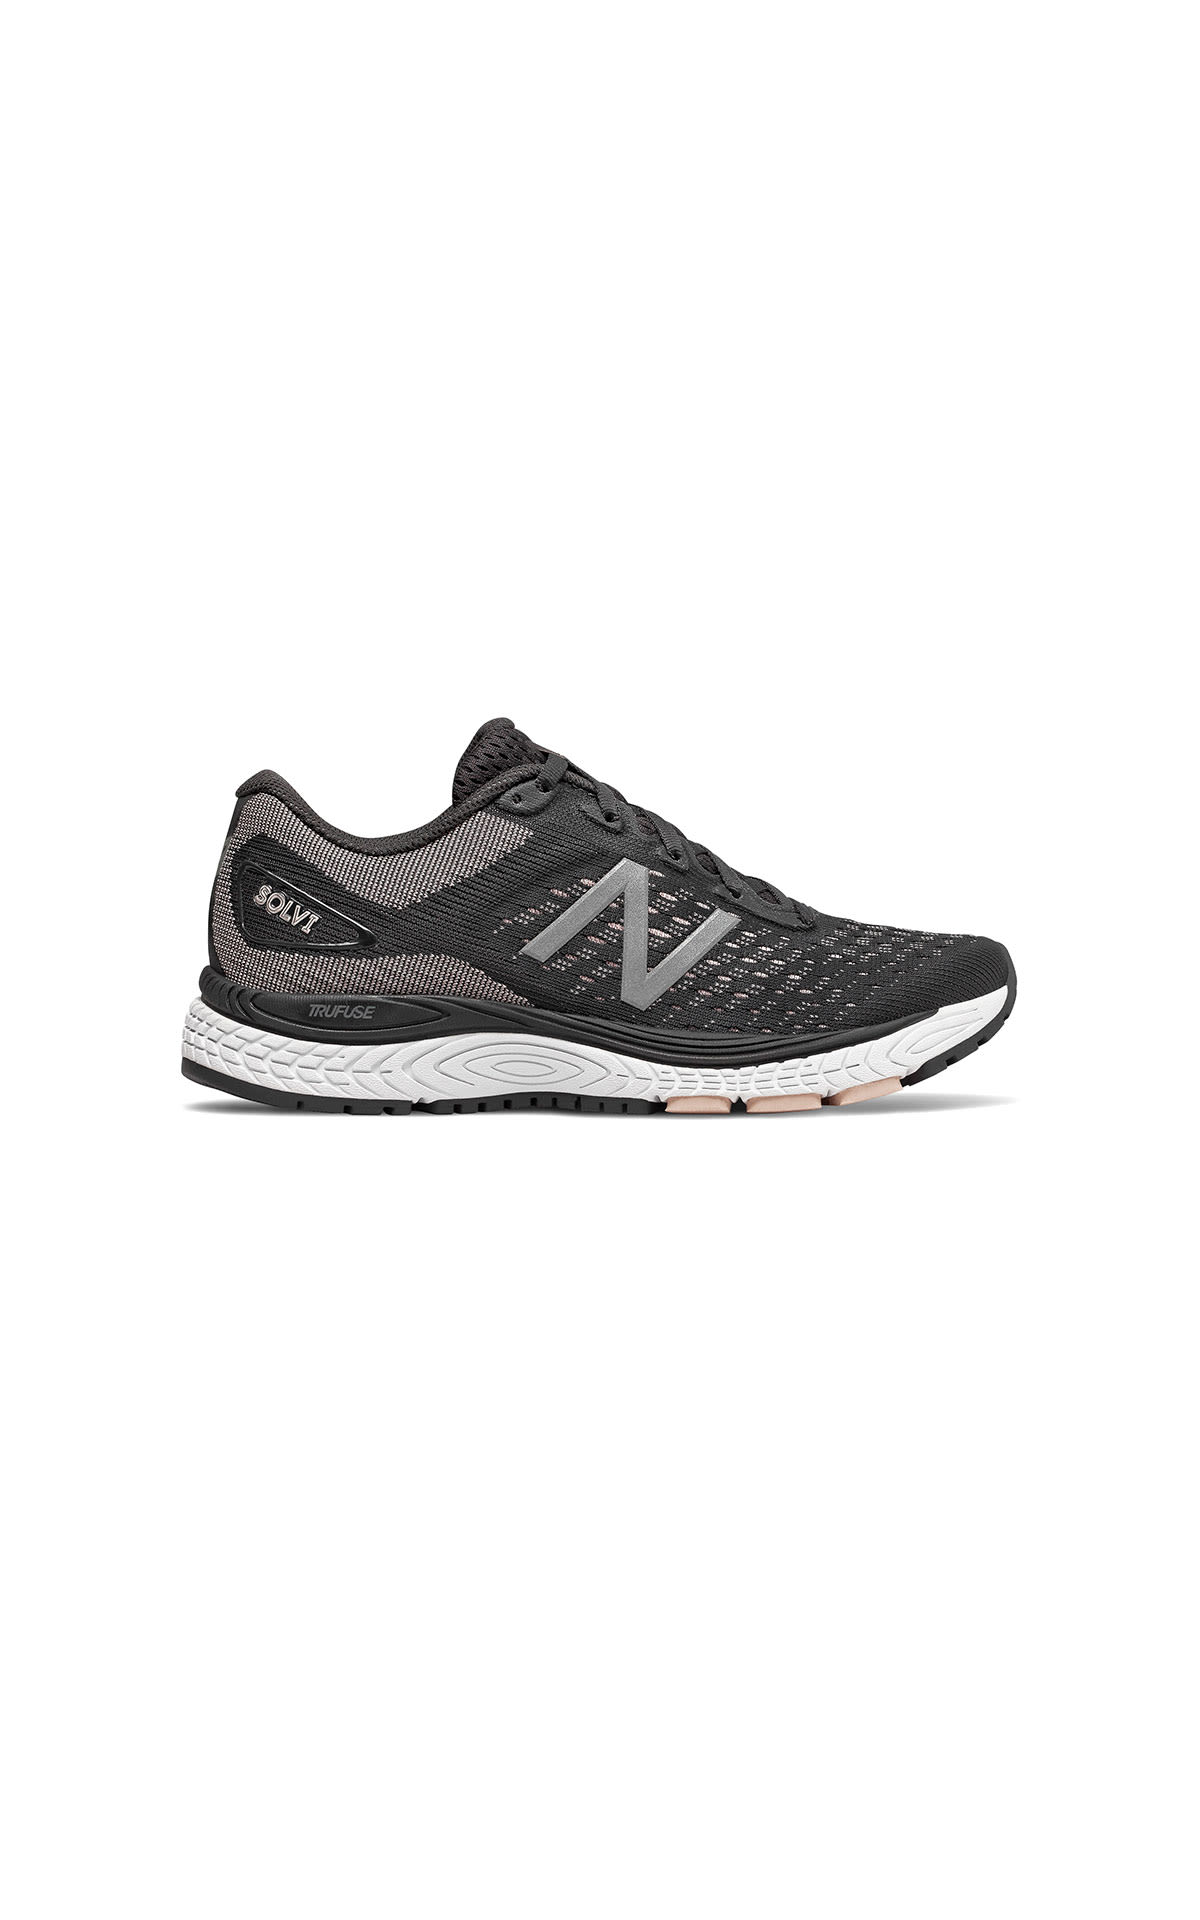 New Balance SOLVI V2 in black at The Bicester Village Shopping Collection